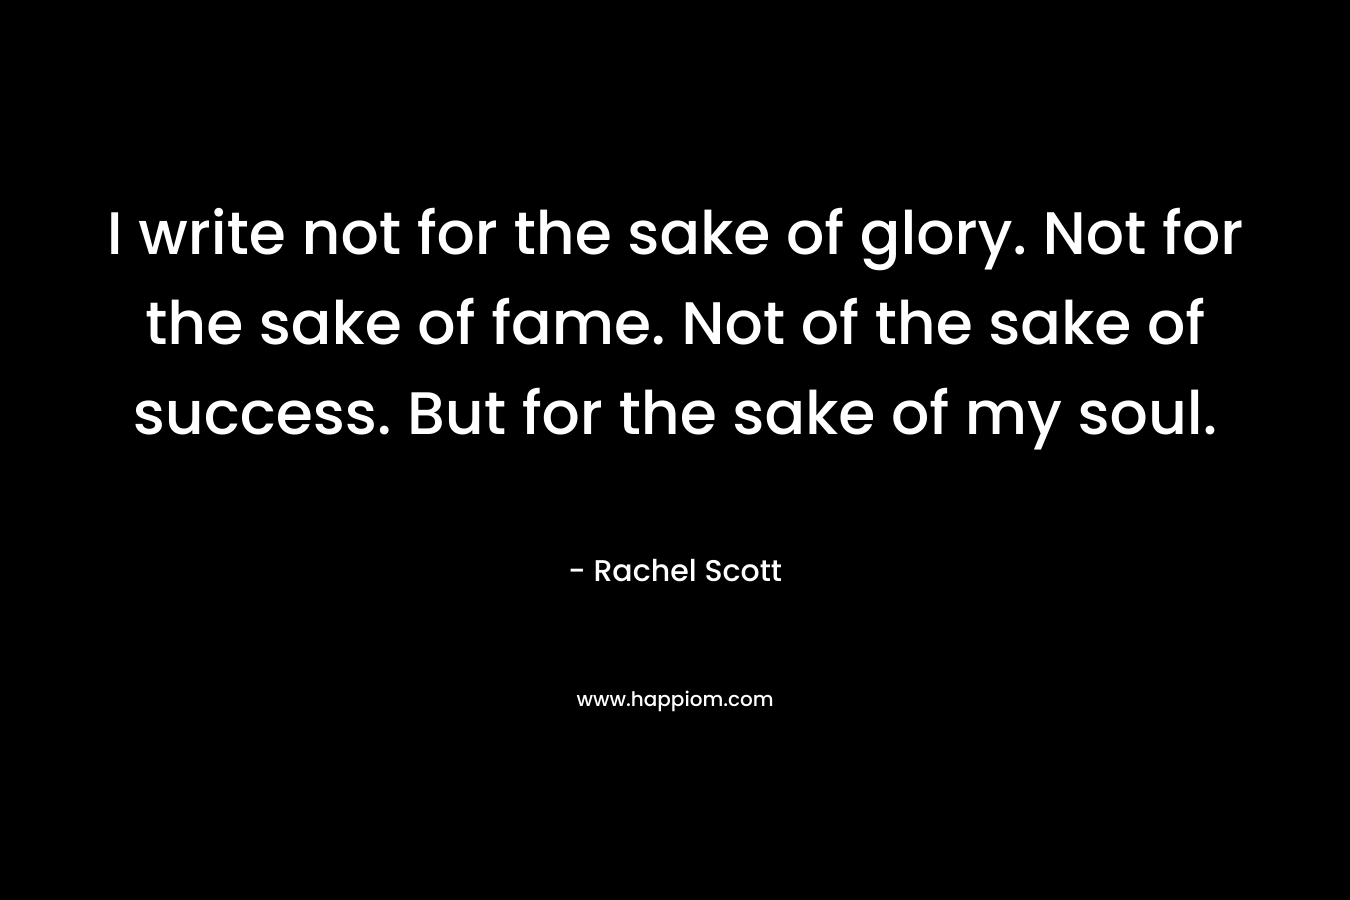 I write not for the sake of glory. Not for the sake of fame. Not of the sake of success. But for the sake of my soul.